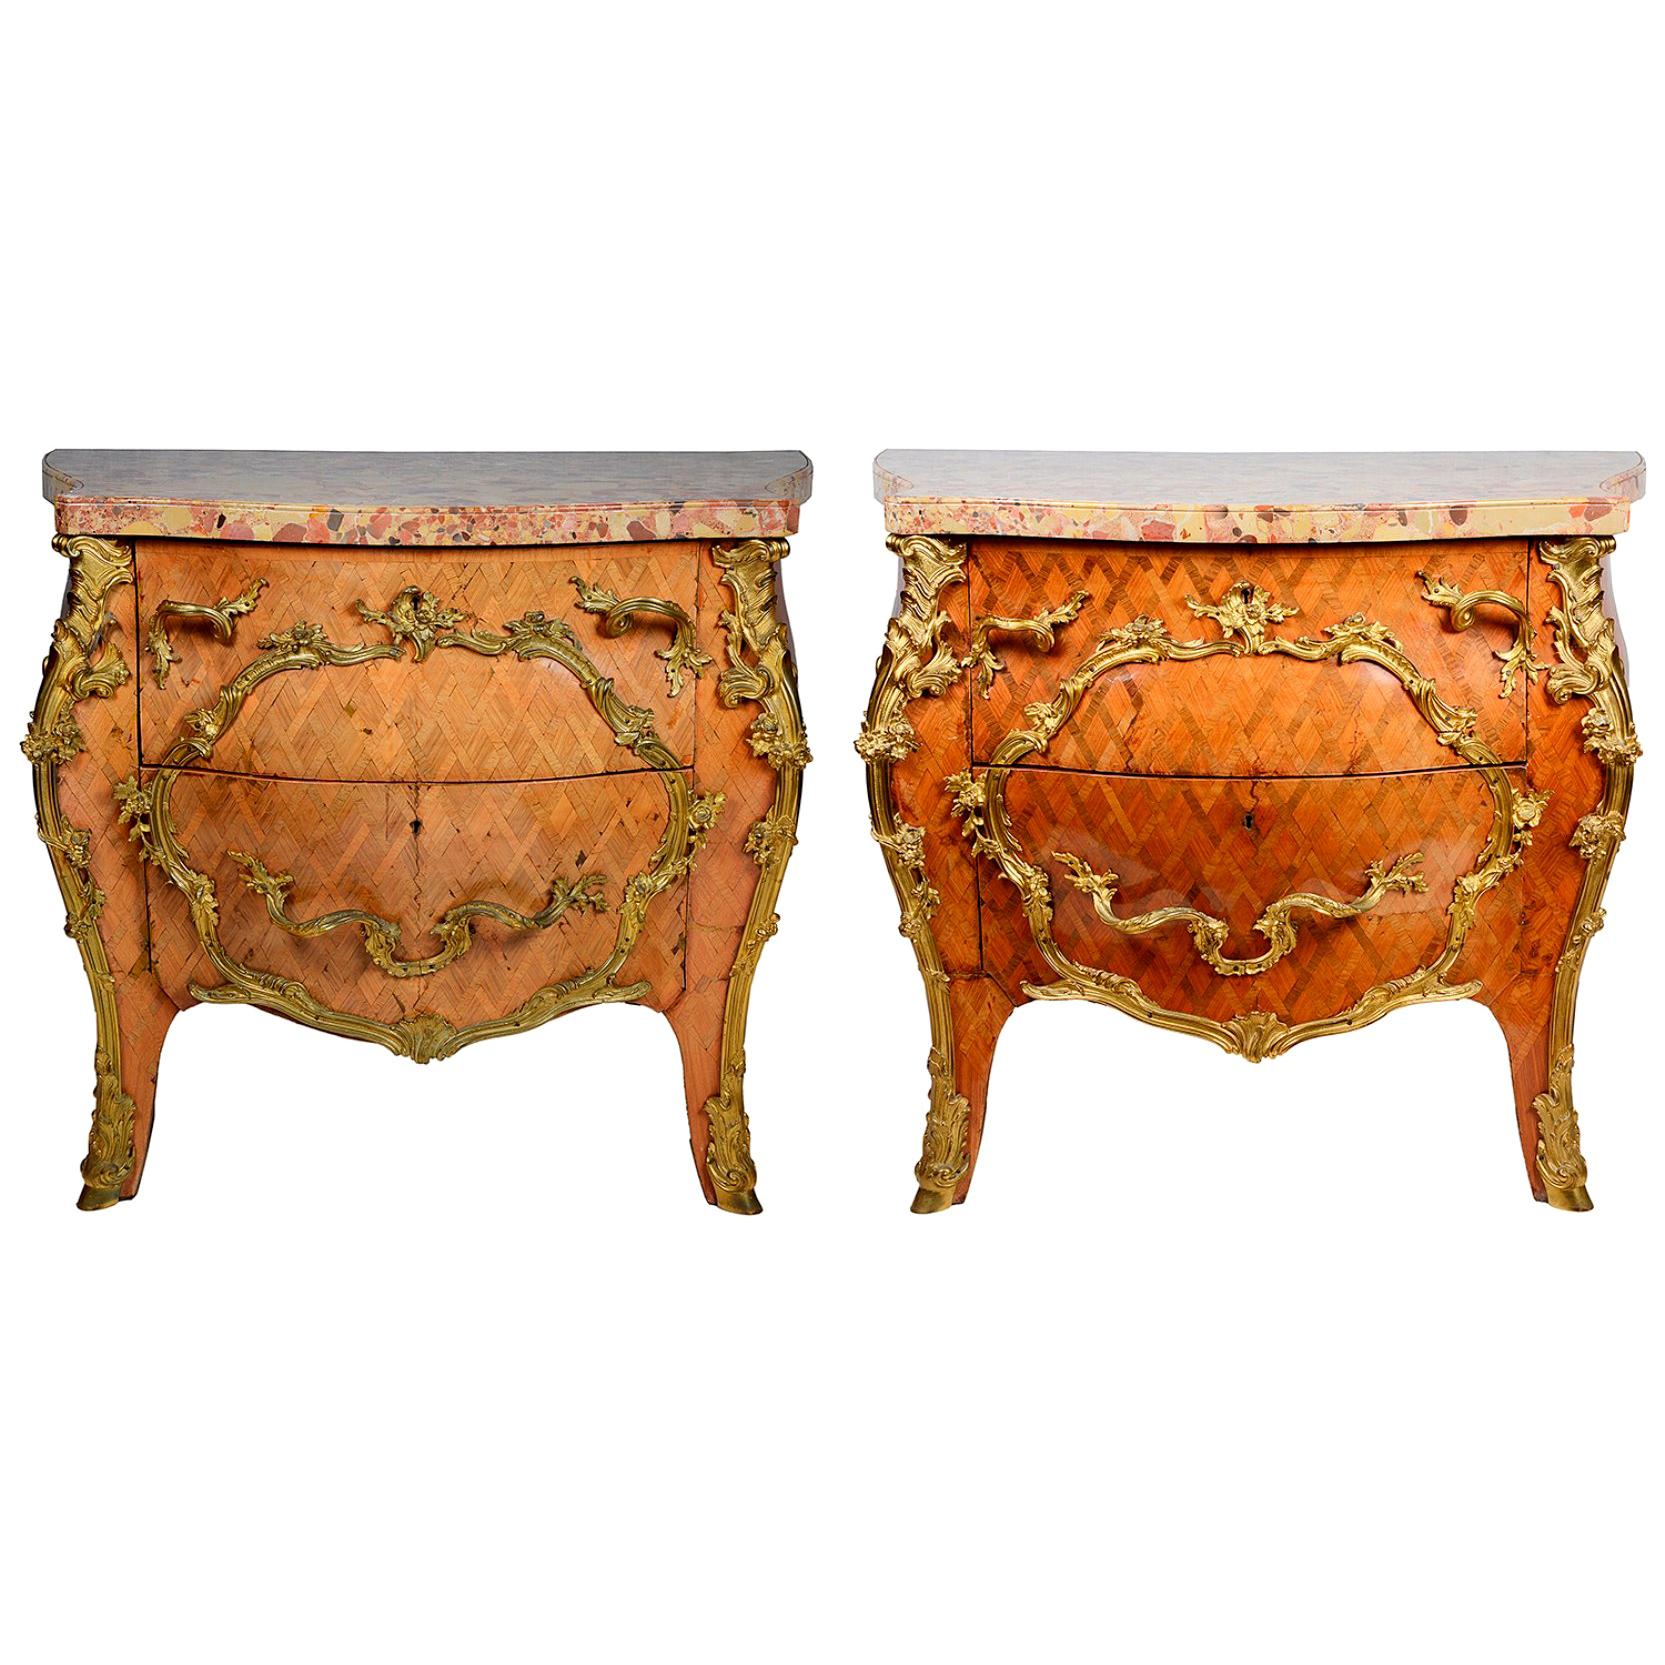 Pair of 18th Century style Marble Topped French Commodes